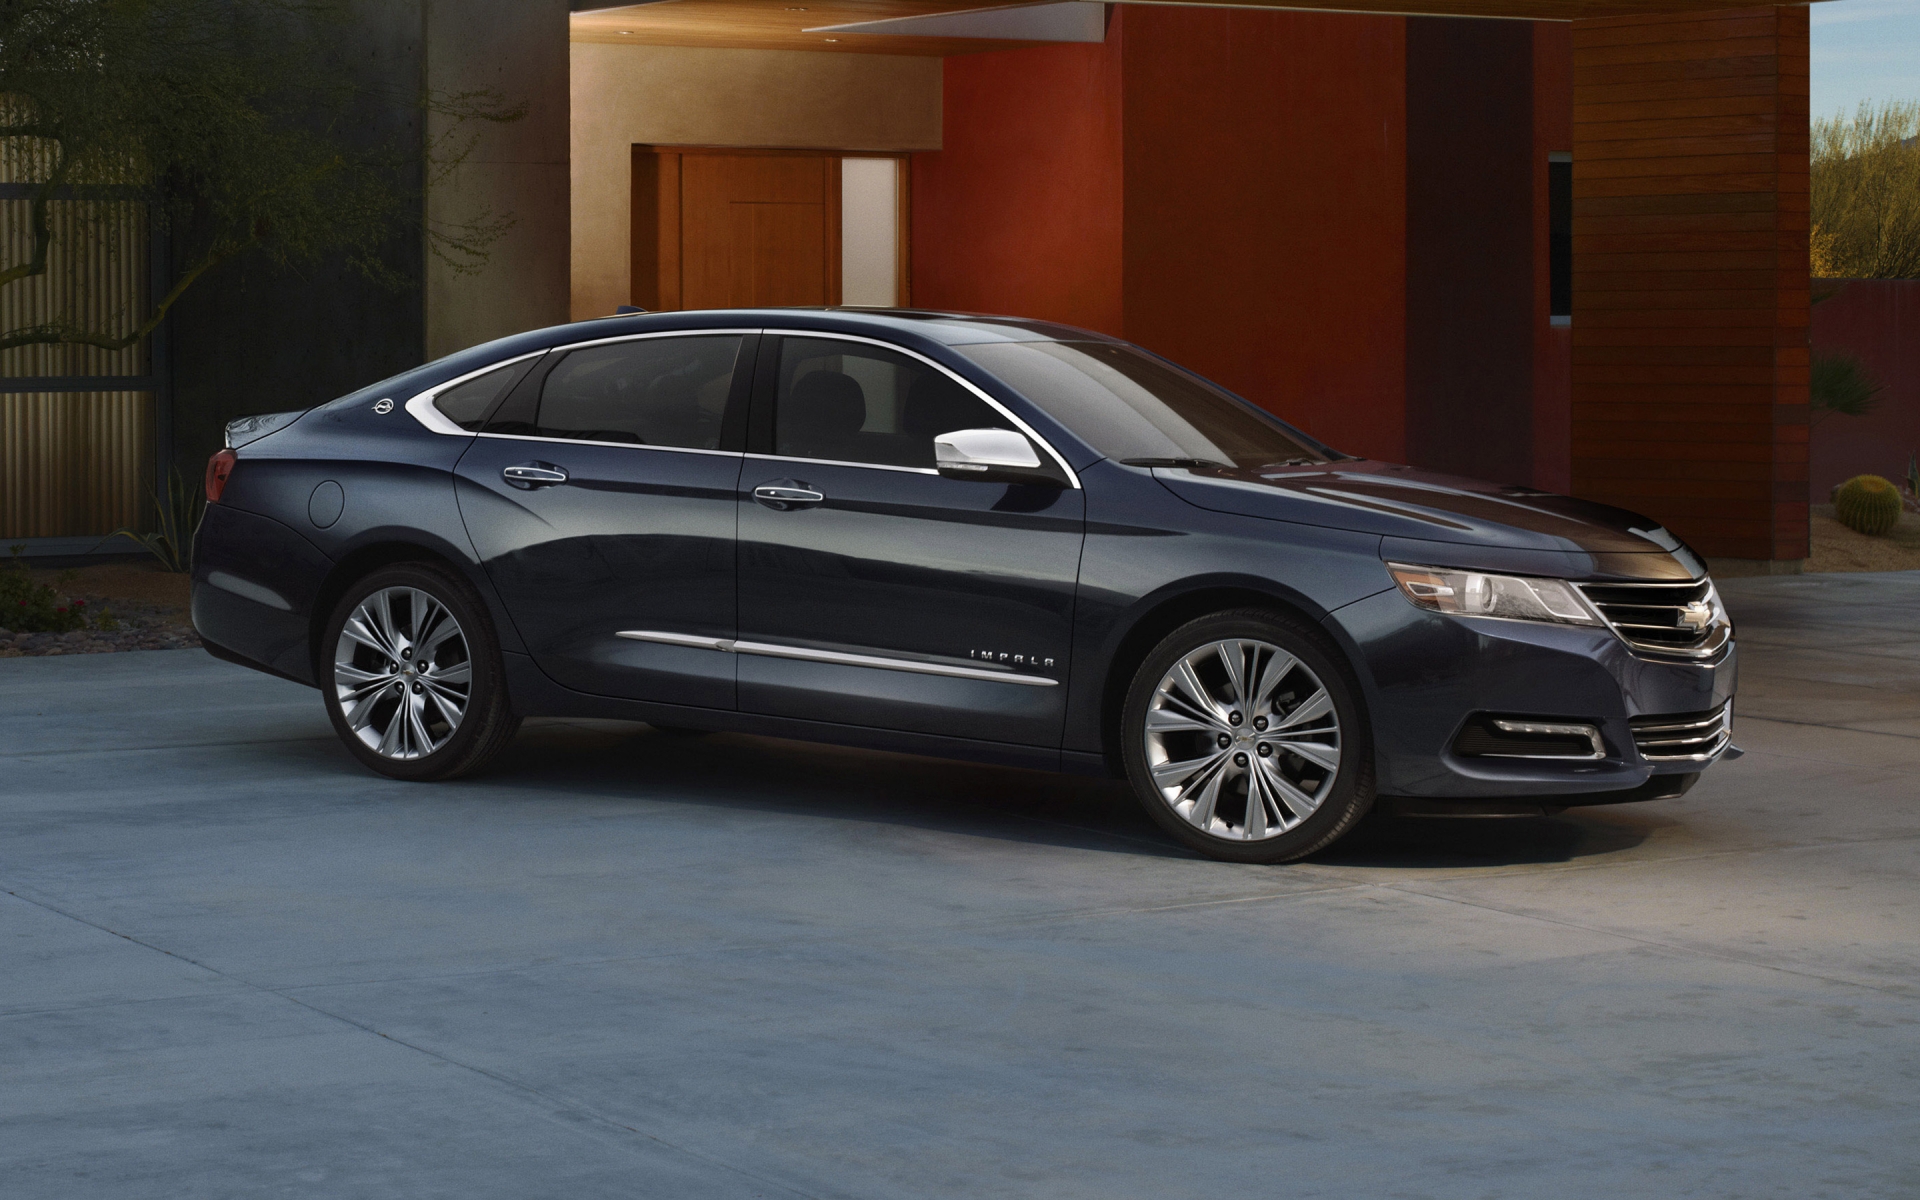 2014 Chevrolet Impala for 1920 x 1200 widescreen resolution